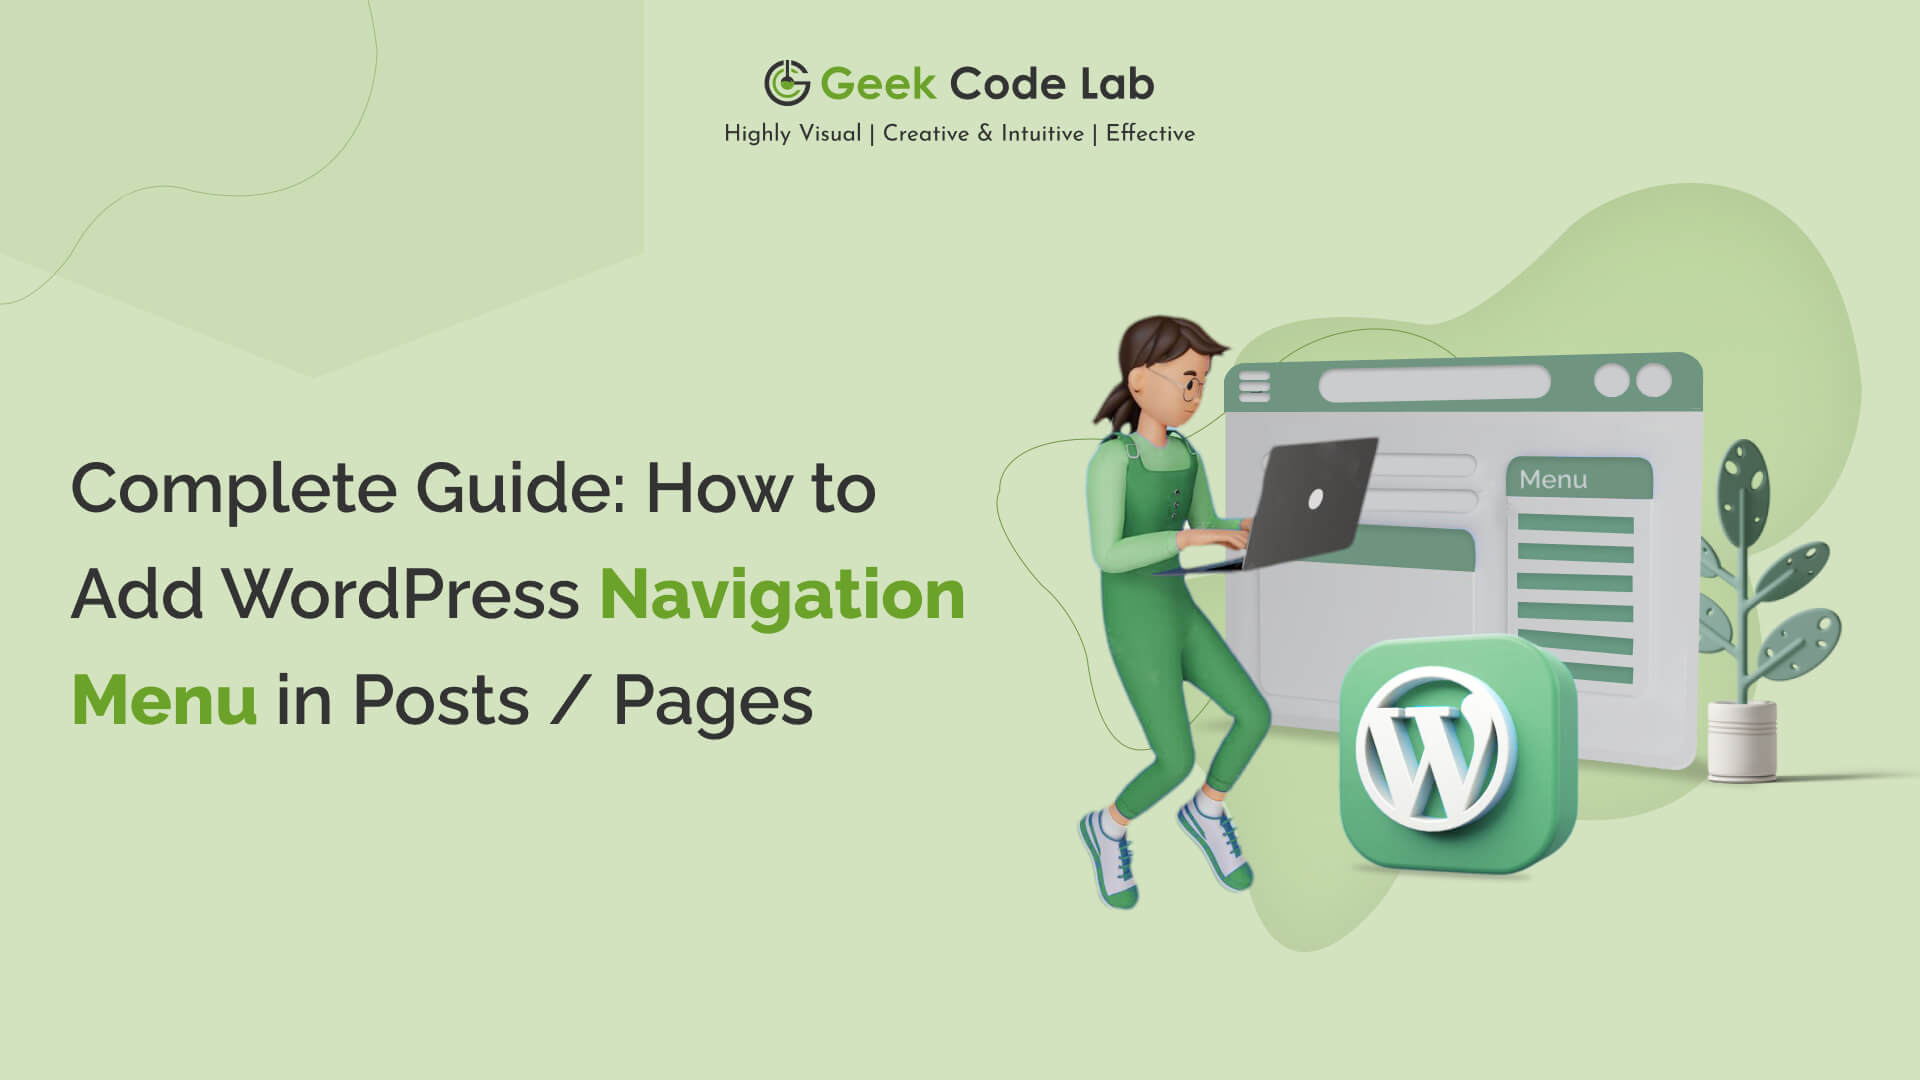 Complete Guide: How to Add WordPress Navigation Menu in Posts / Pages